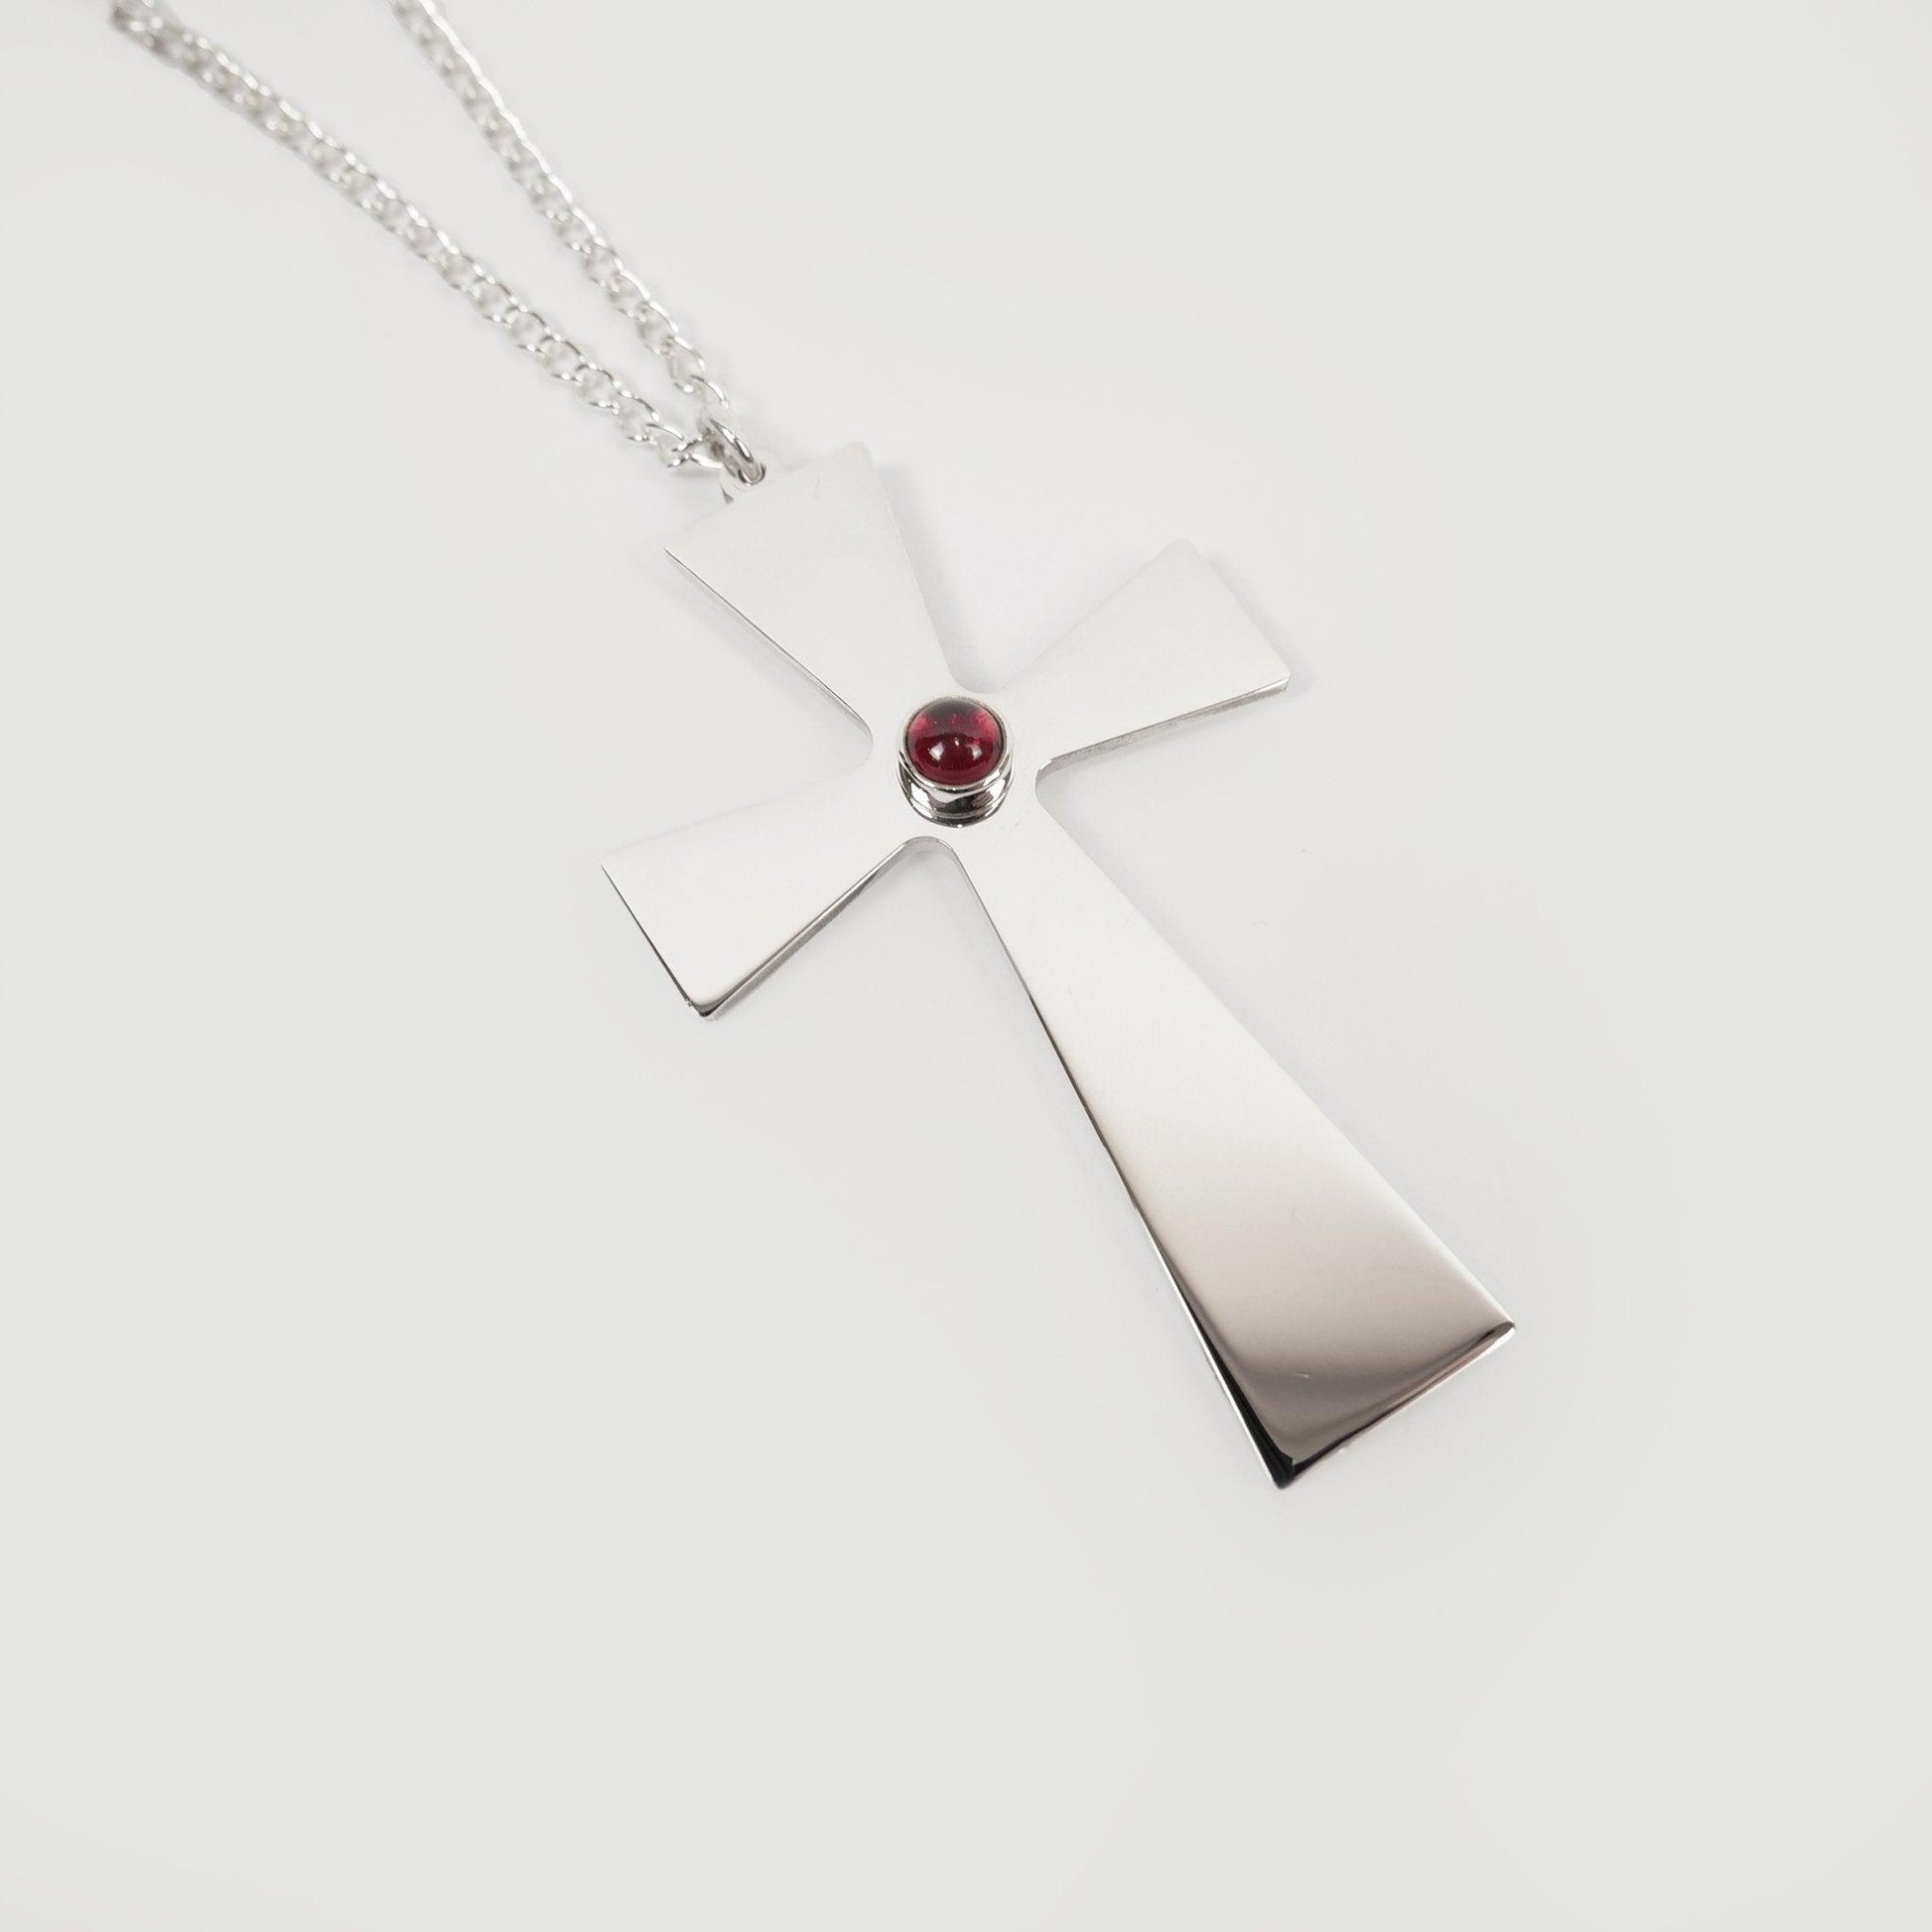 3" sterling silver pectoral cross with garnet - Watts & Co.